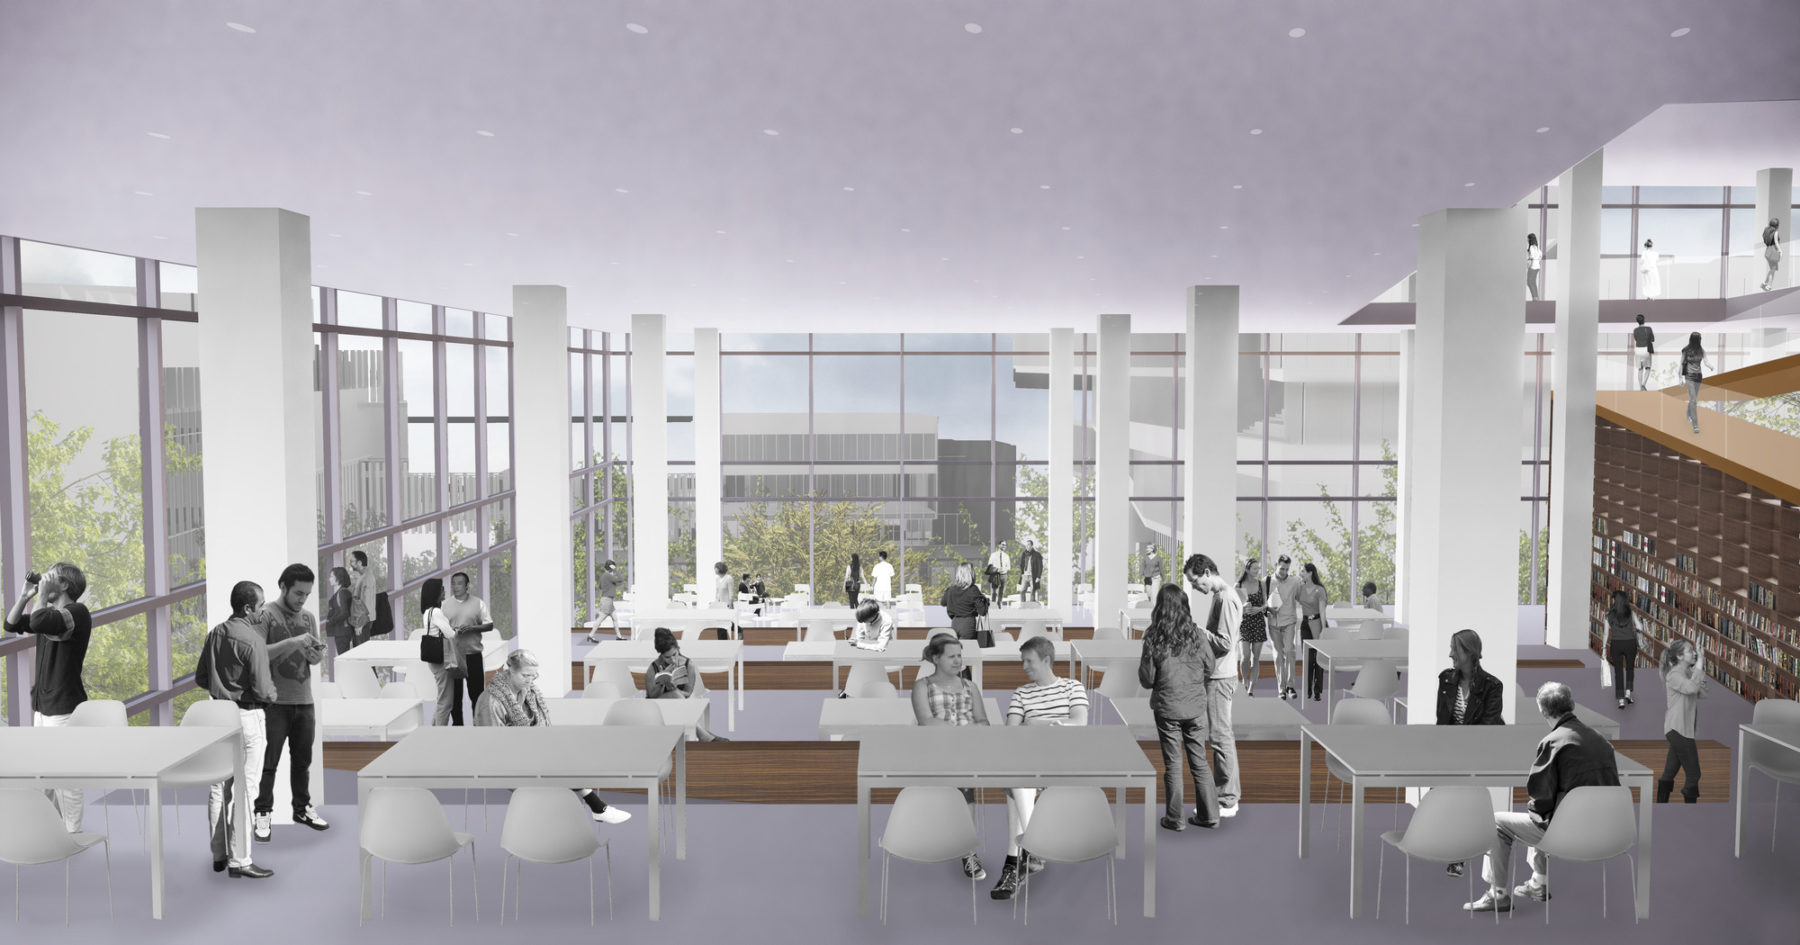 Rendering of the library open seating areas and windows